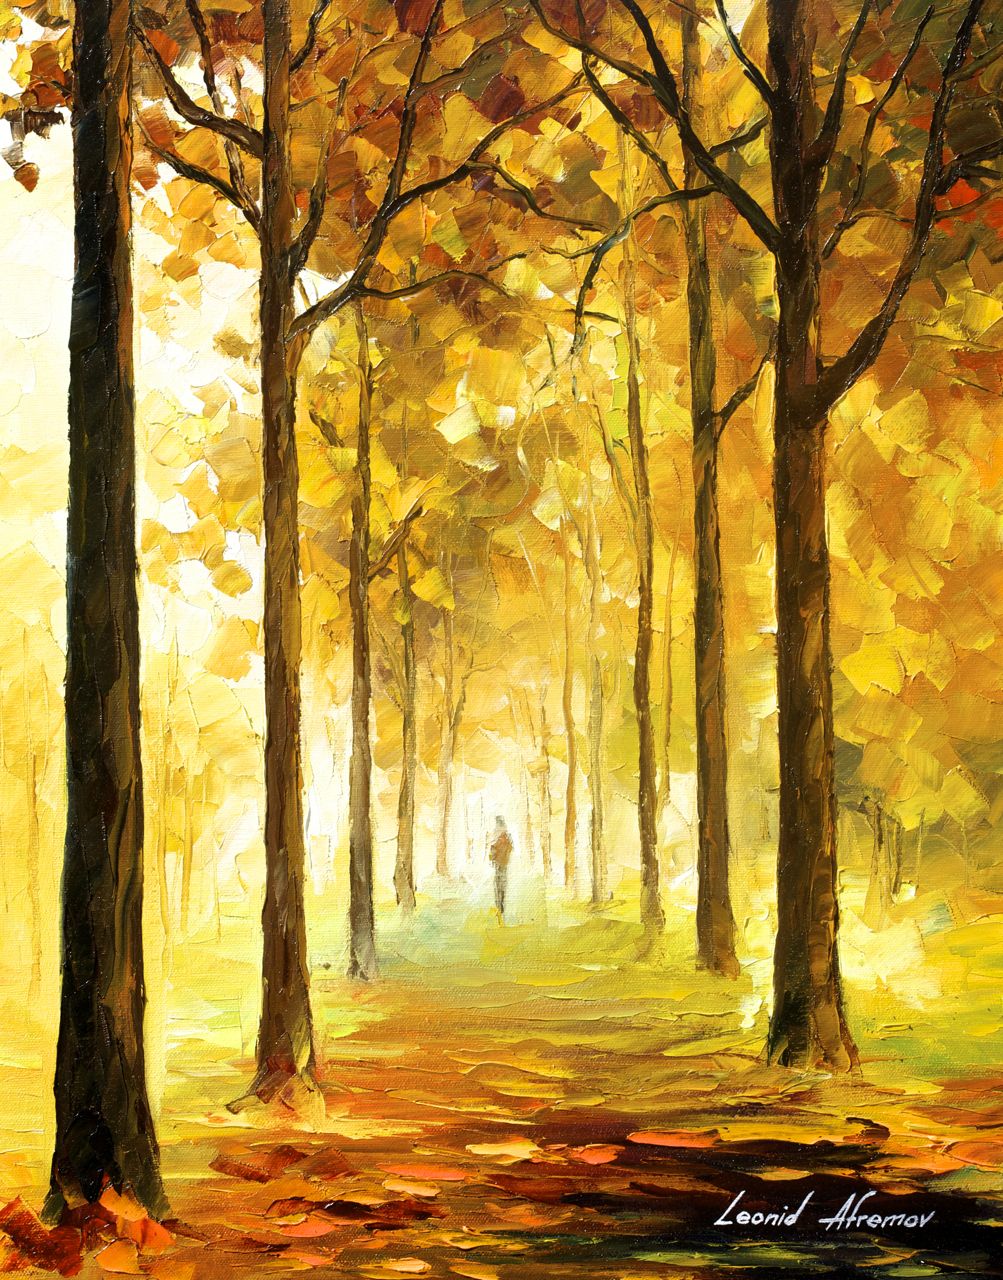 YELLOW MOOD - Afremov - Paint By Numbers Kit